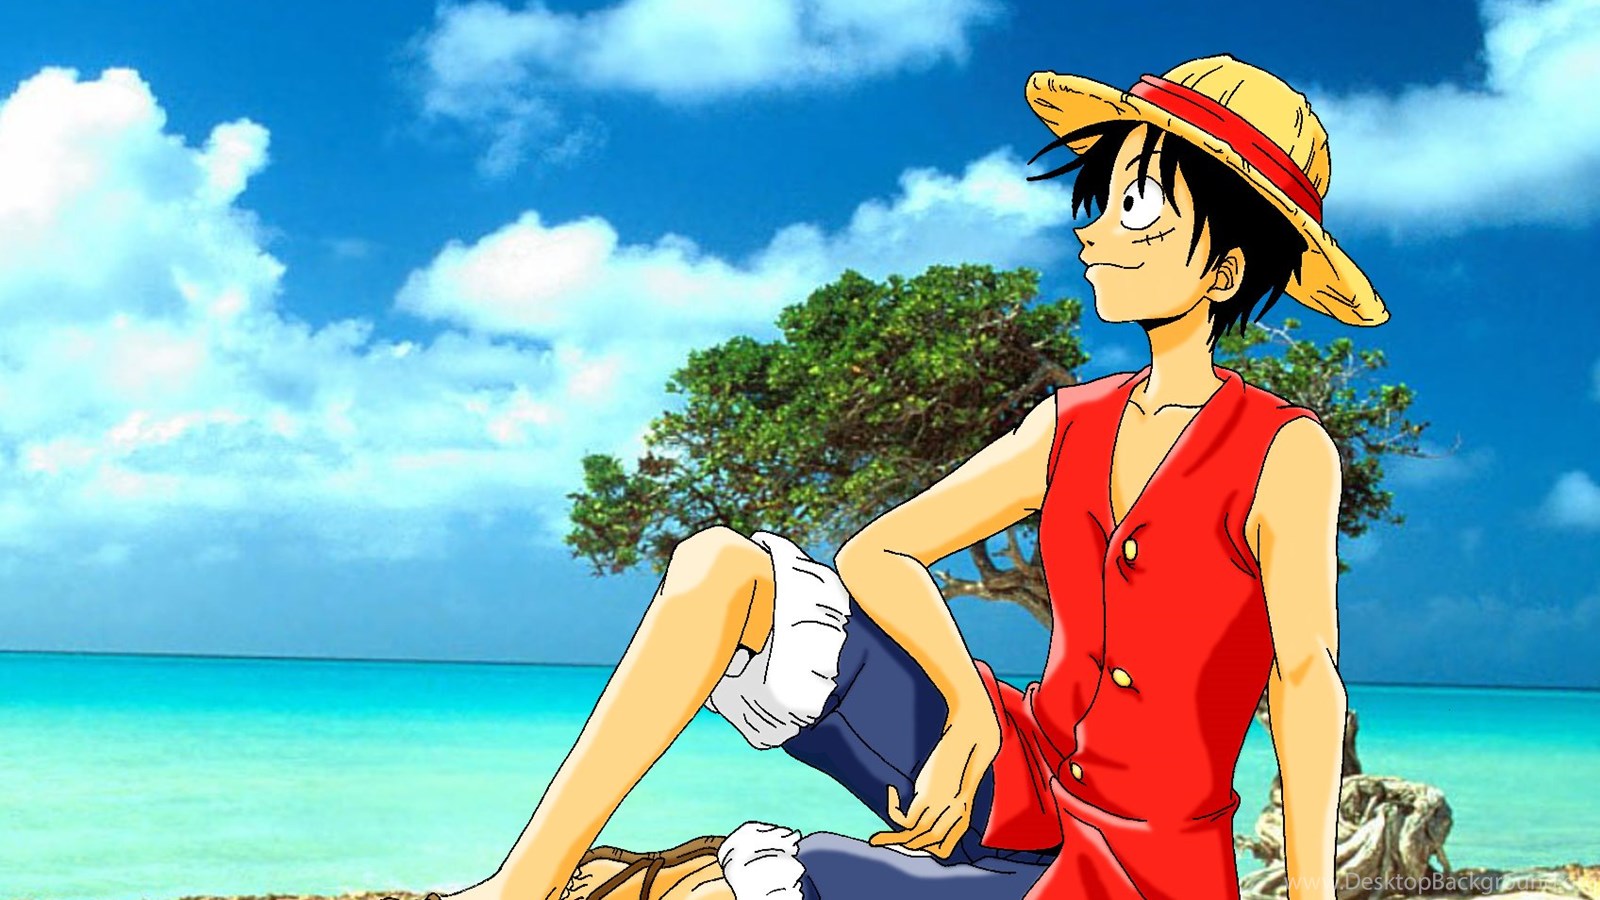 One Piece Luffy Wallpapers Full HD : Anime Wallpapers ...